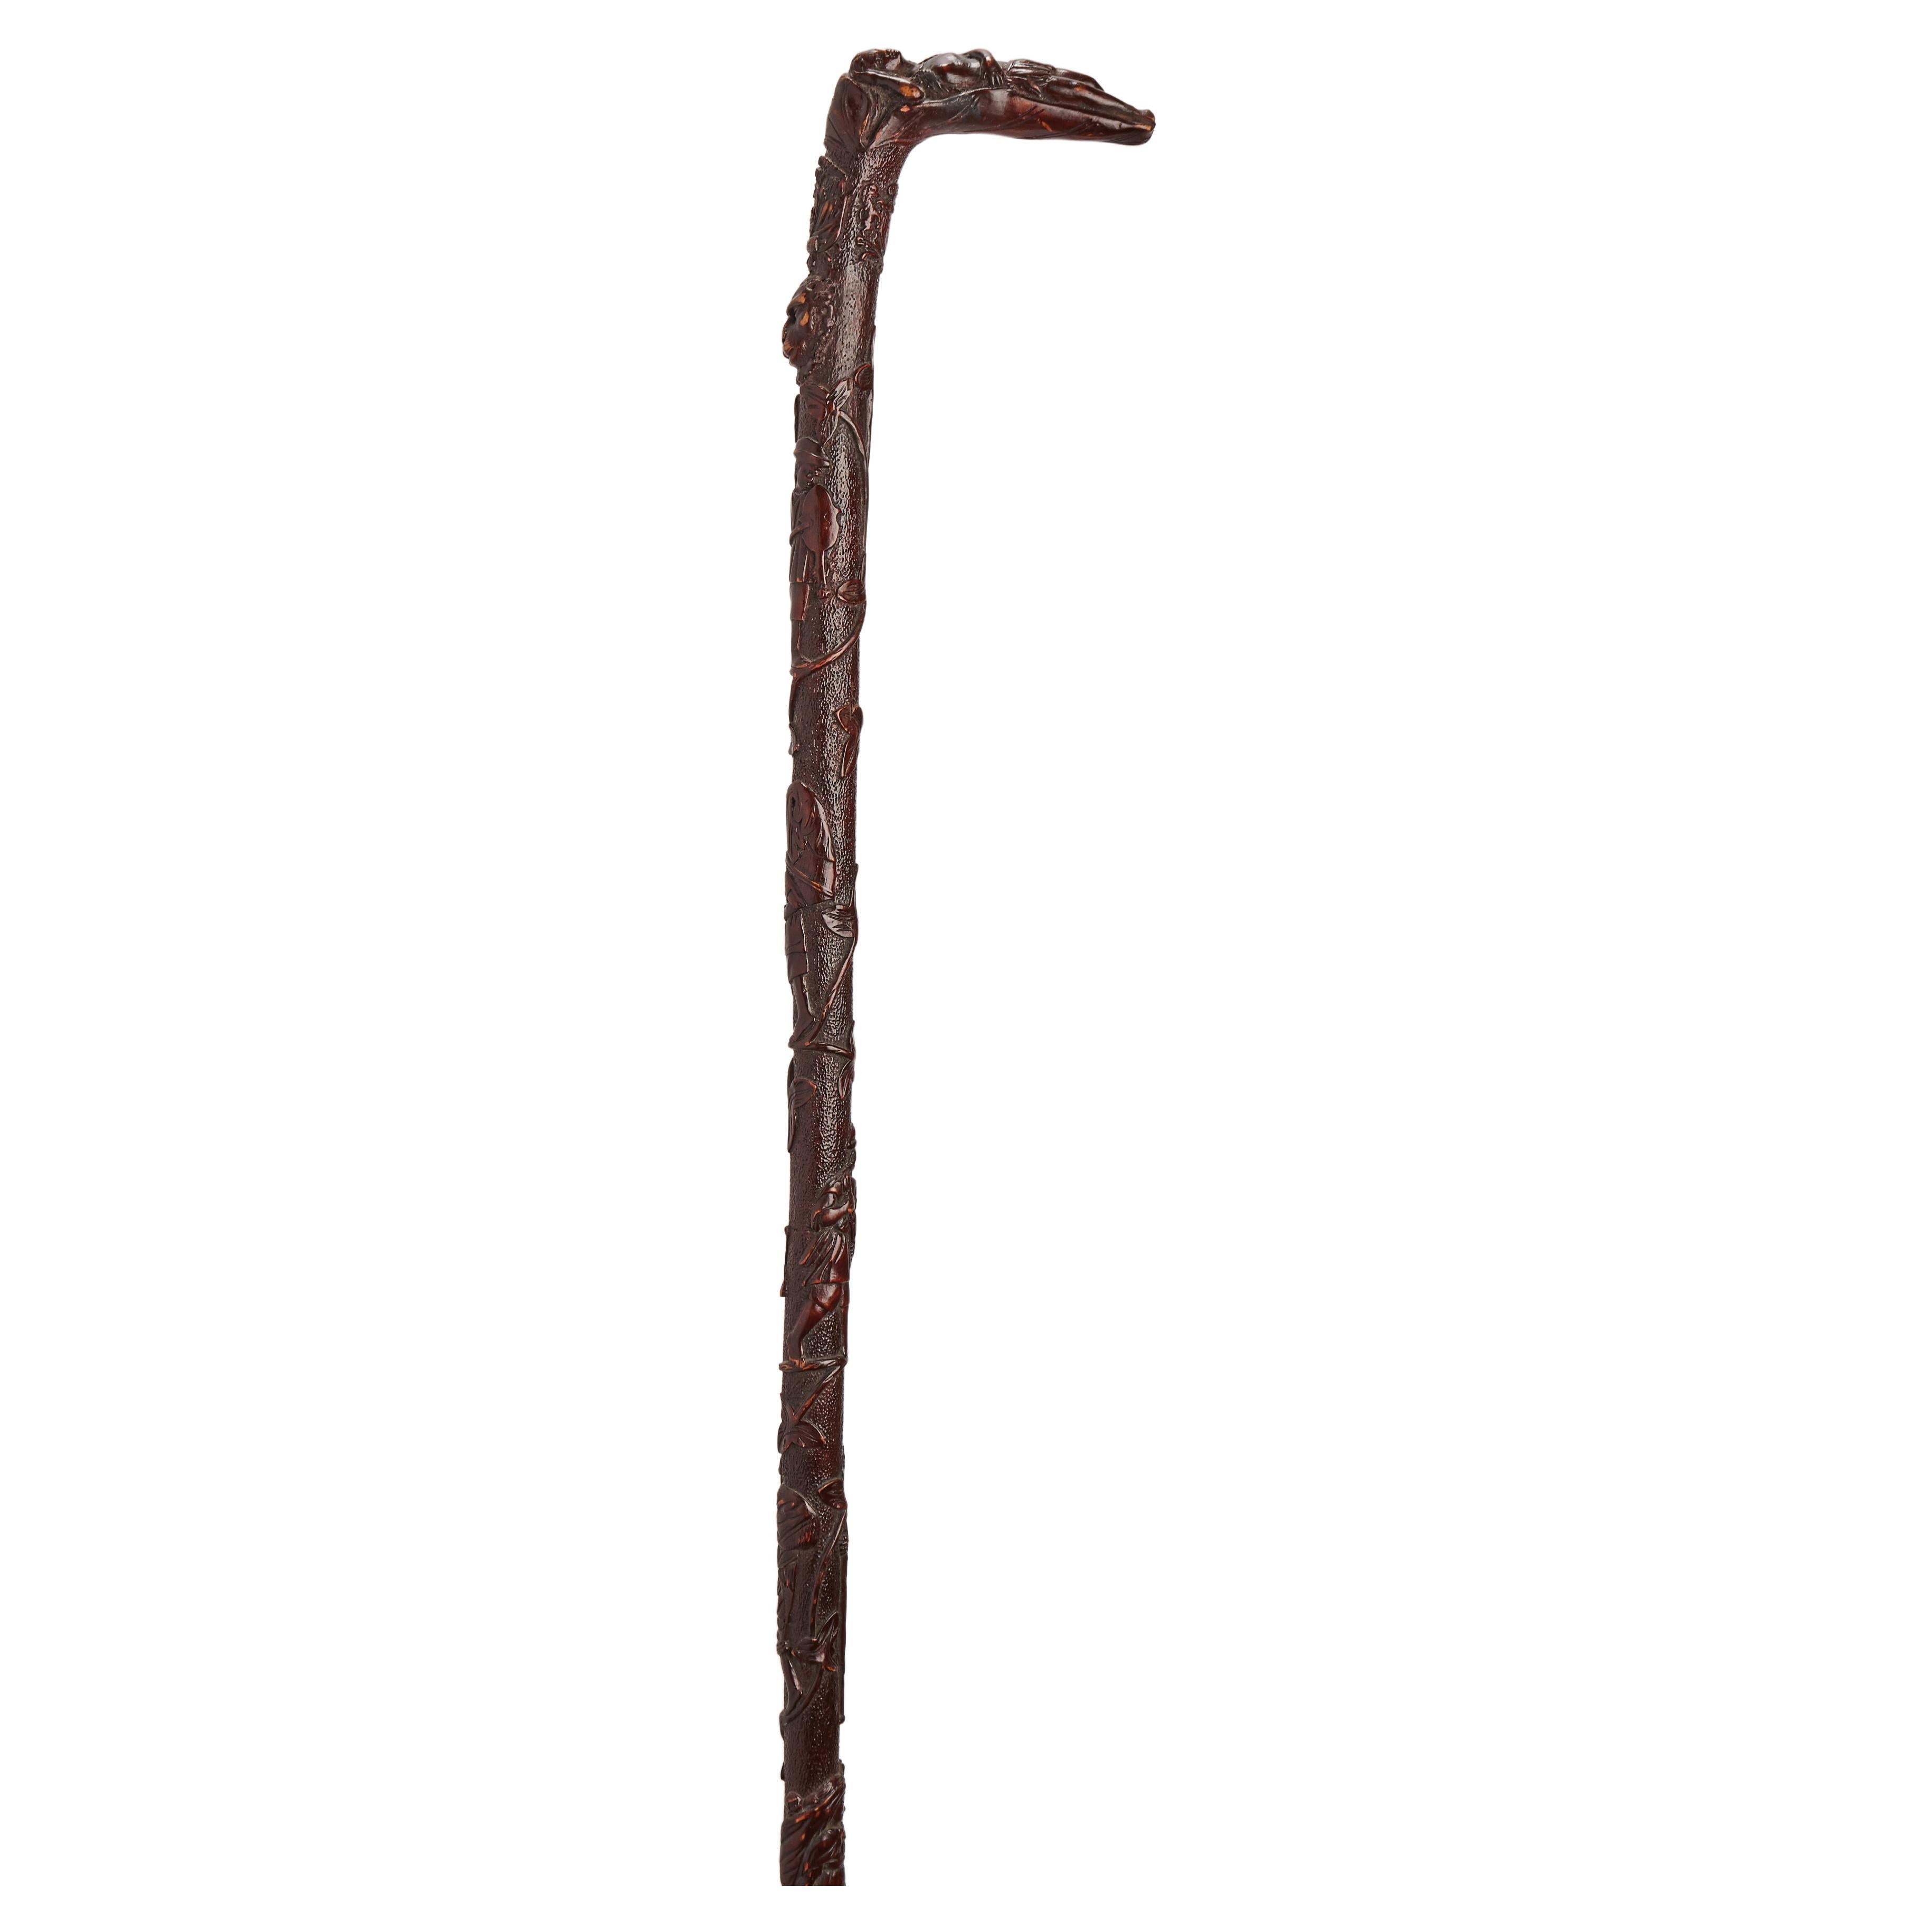 A refined Folk art walking stick with arts and crafts, Center America 1860. For Sale